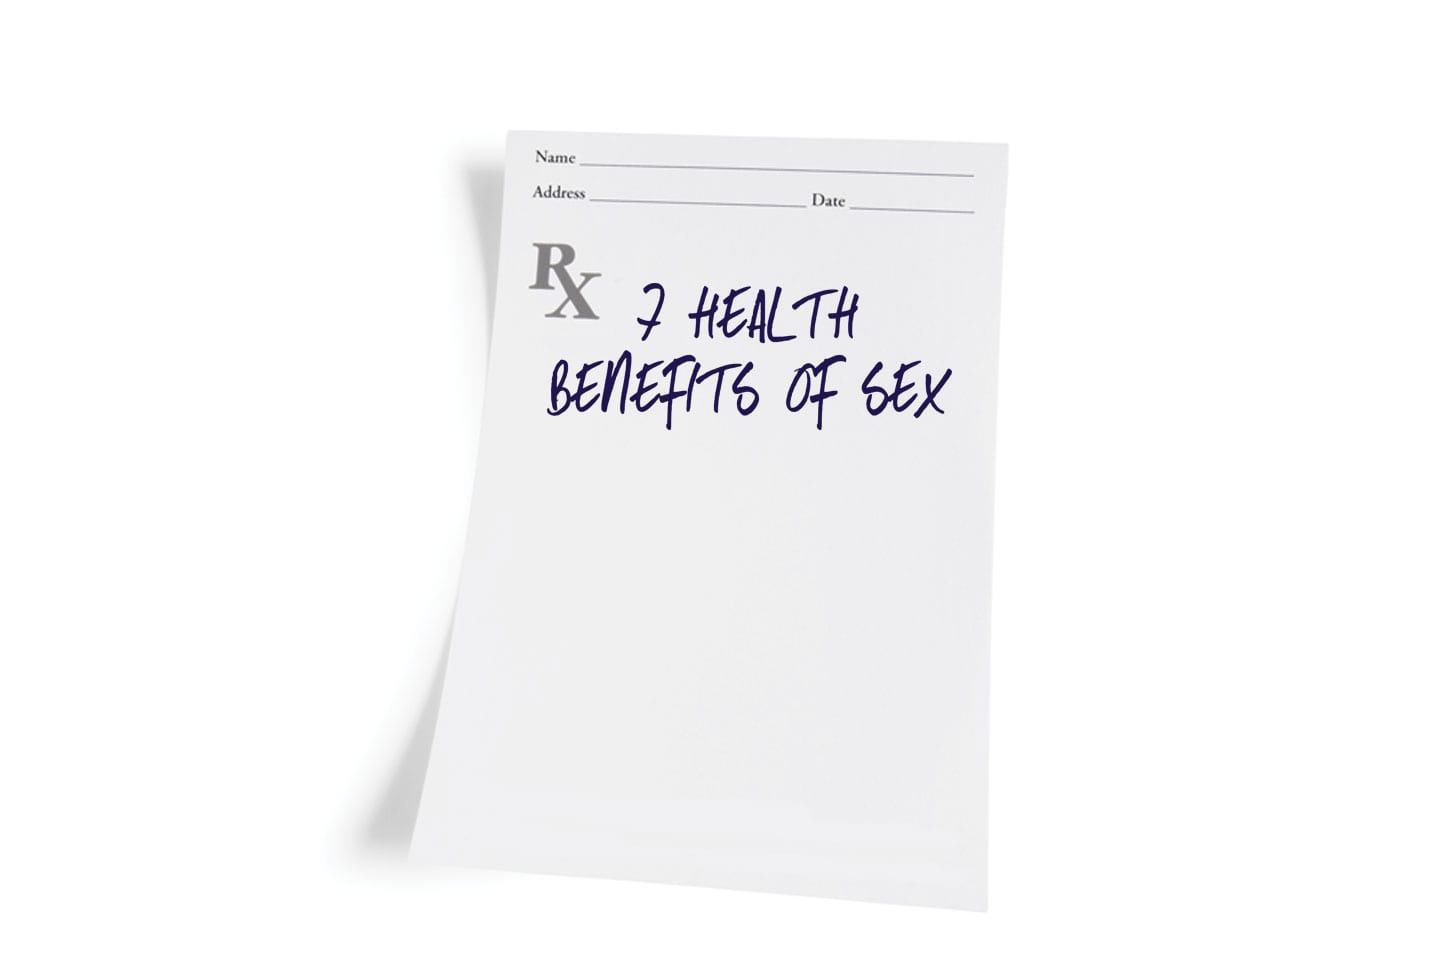 Prescription pad with 7 Health Benefits of Sex written on it